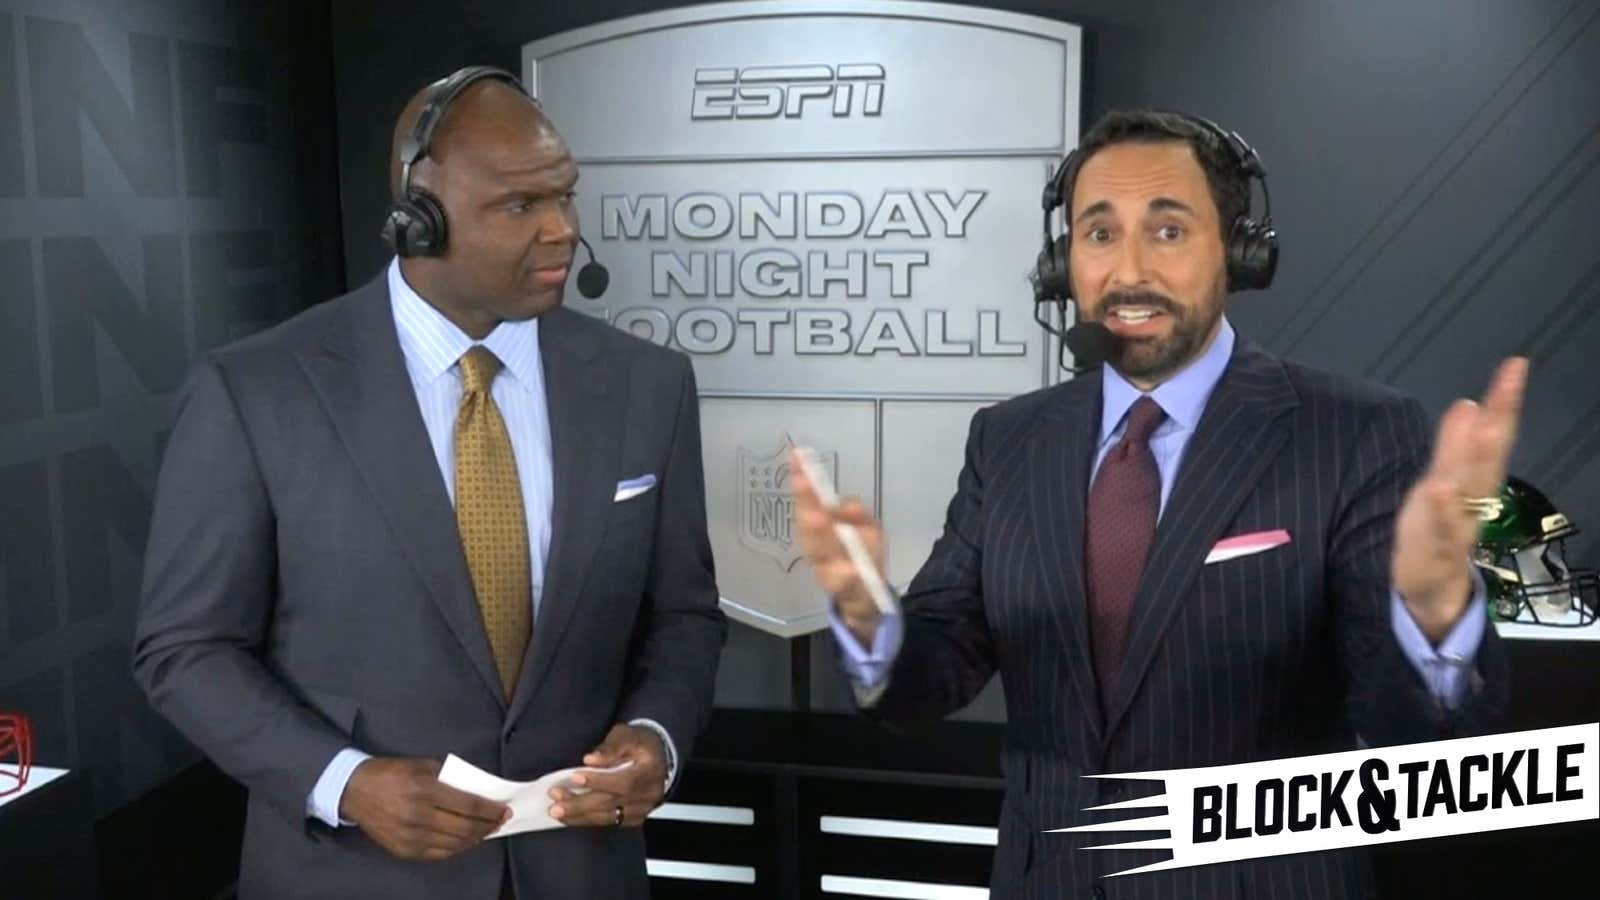 Monday Night Football play-by-play announcer Joe Tessitore (right) gesticulates while analyst Booger McFarland looks on.